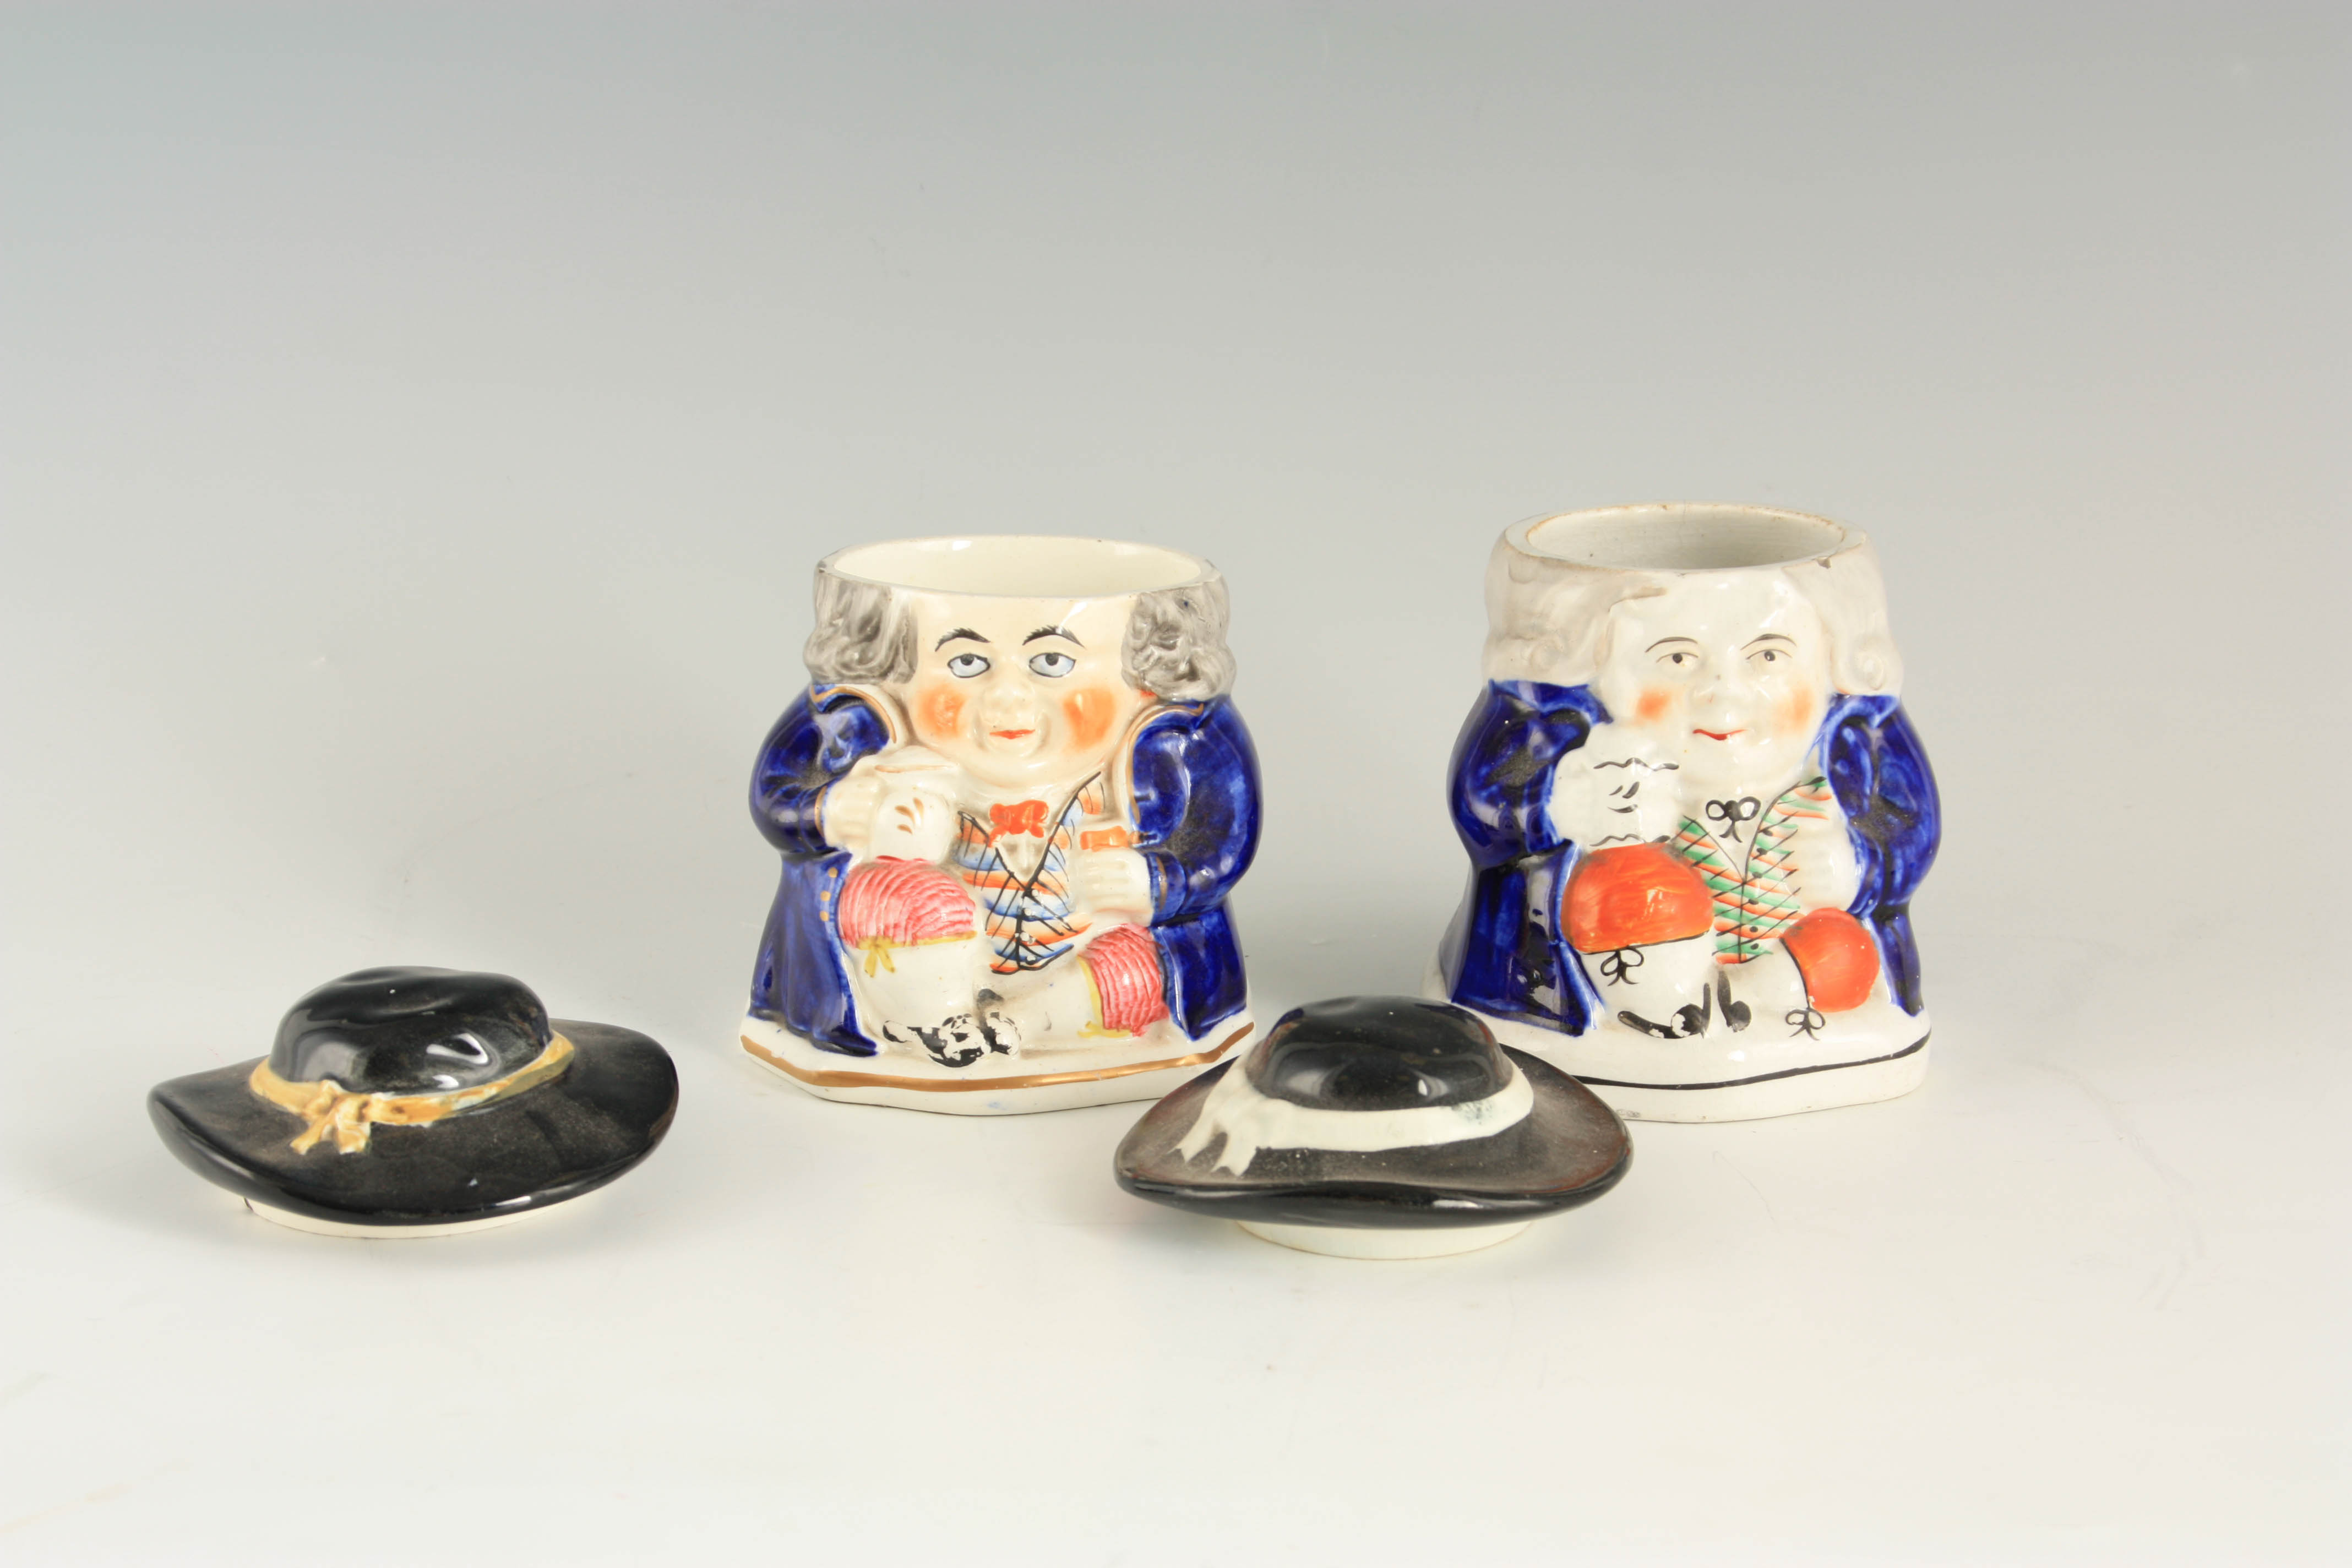 A PAIR OF COLOURFUL SEATED TOBY FIGURE LIDDED JARS 12.5cm high - Image 3 of 4